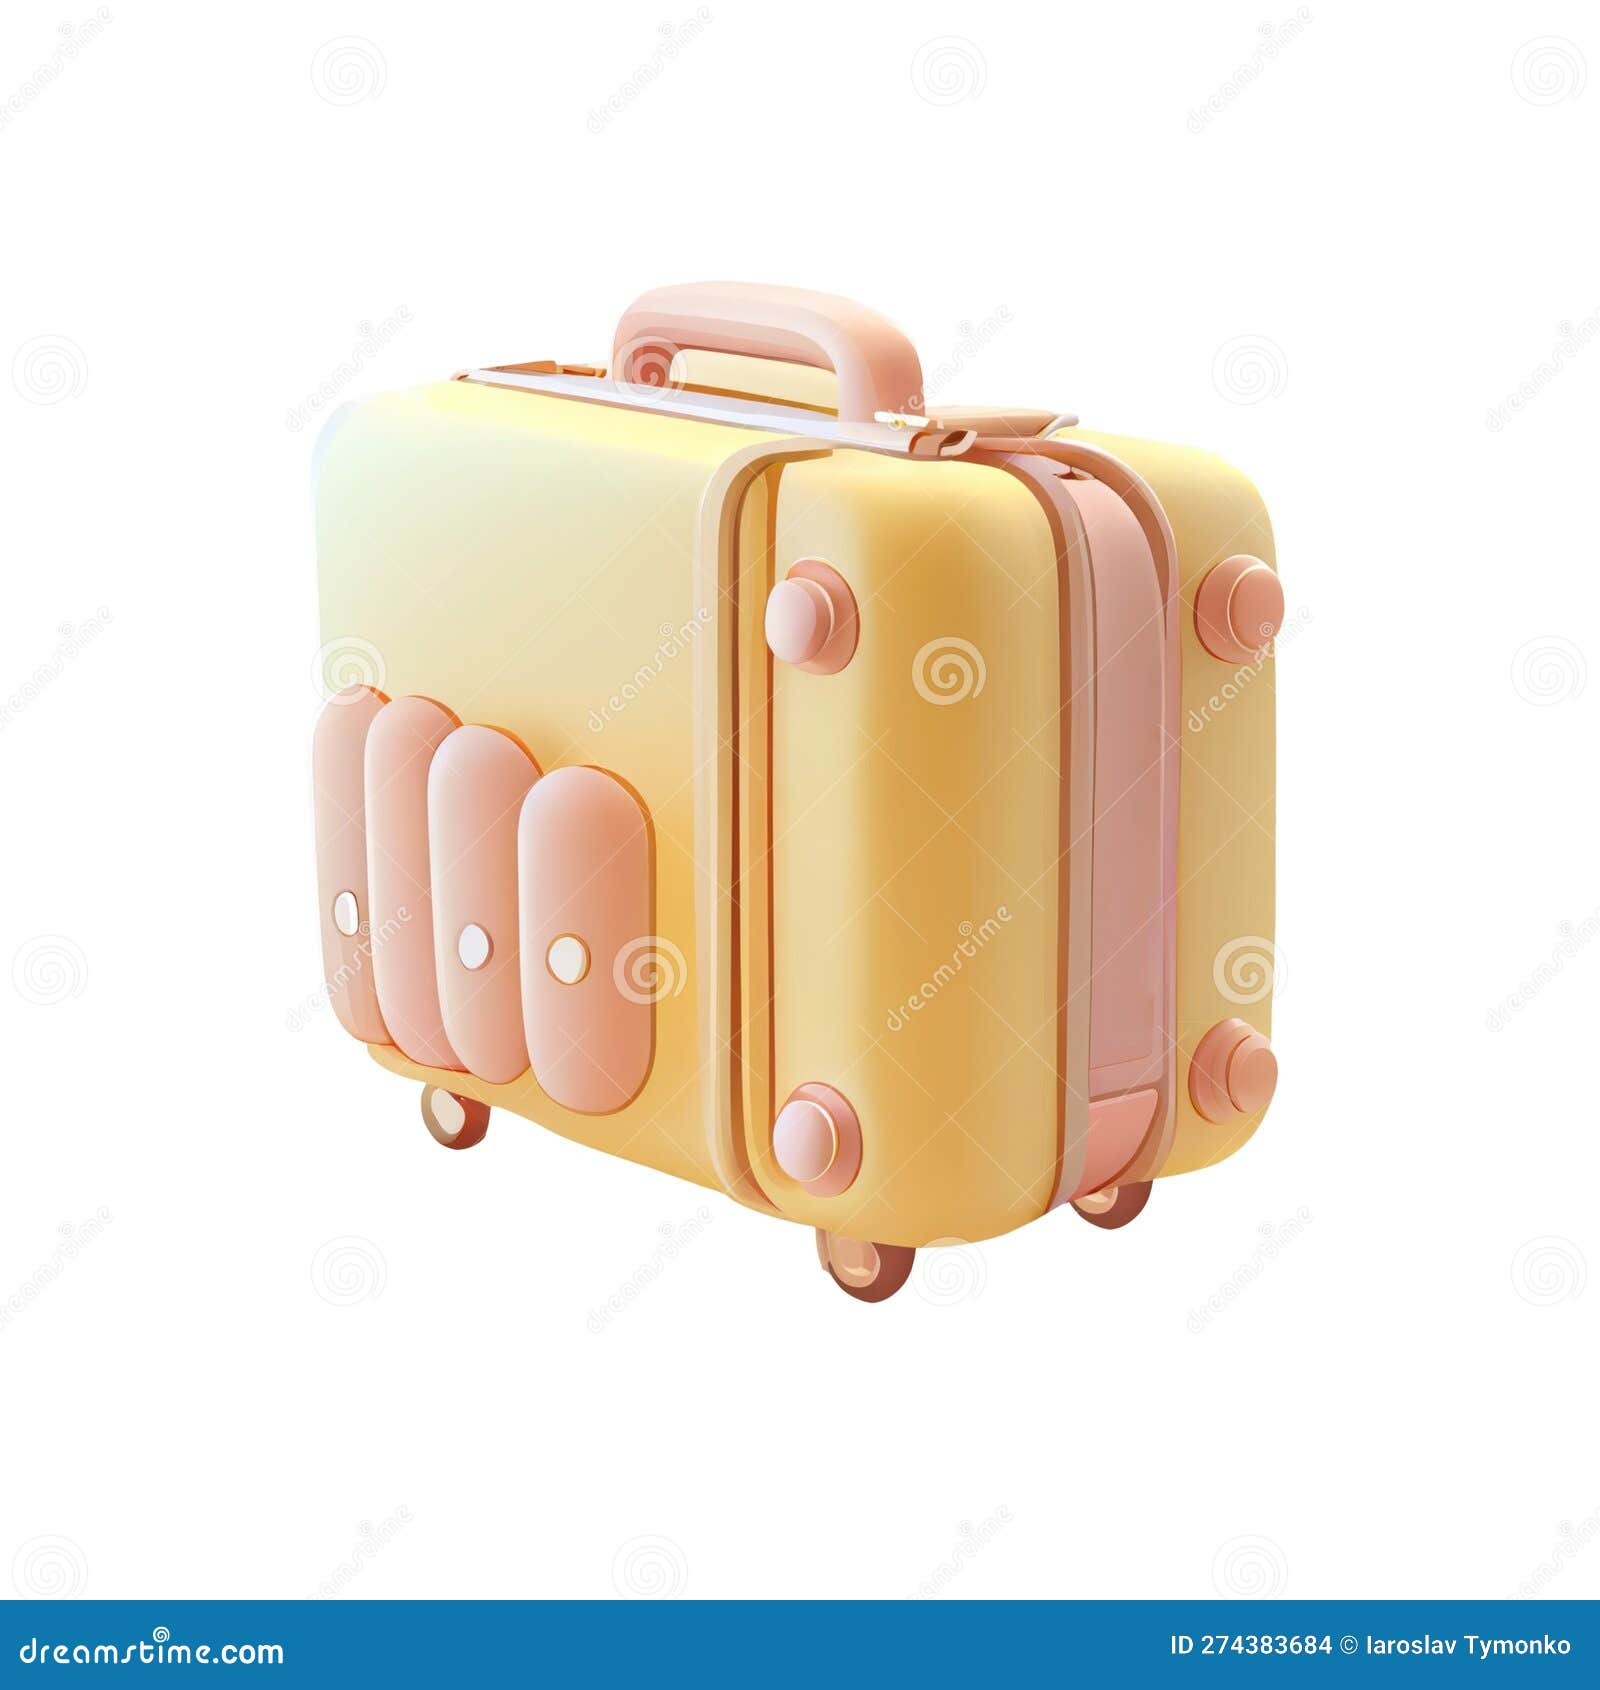 Suitcase Baggage Travel , luggage transparent background PNG clipart